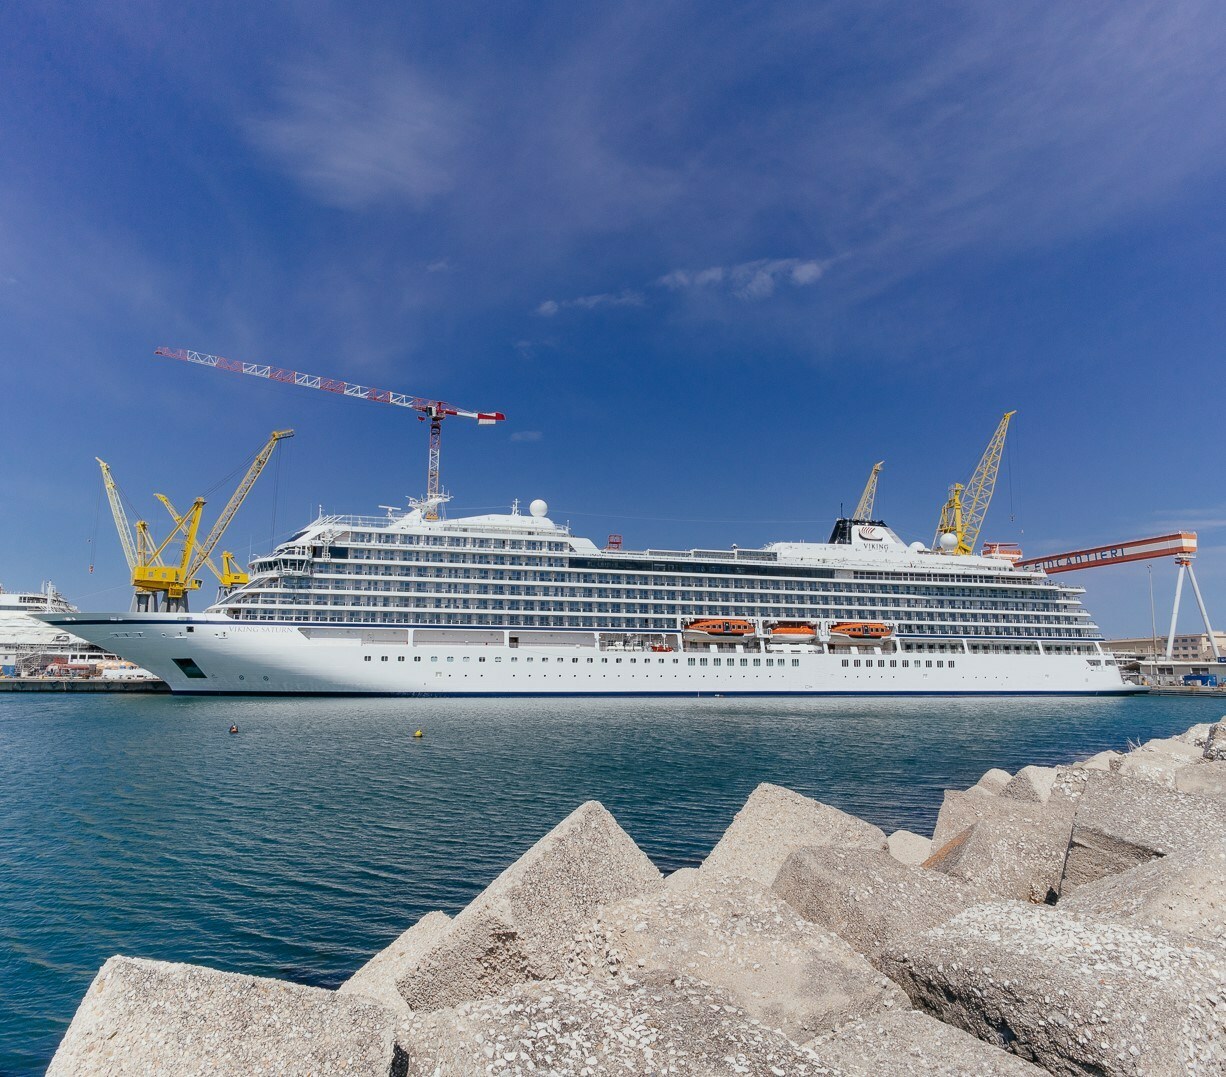 Viking today announced it has taken delivery of the company’s newest ocean ship, the Viking Saturn. The delivery ceremony took place this morning when the ship was presented at Fincantieri’s shipyard in Ancona, Italy (Image at LateCruiseNews.com - April 2023)